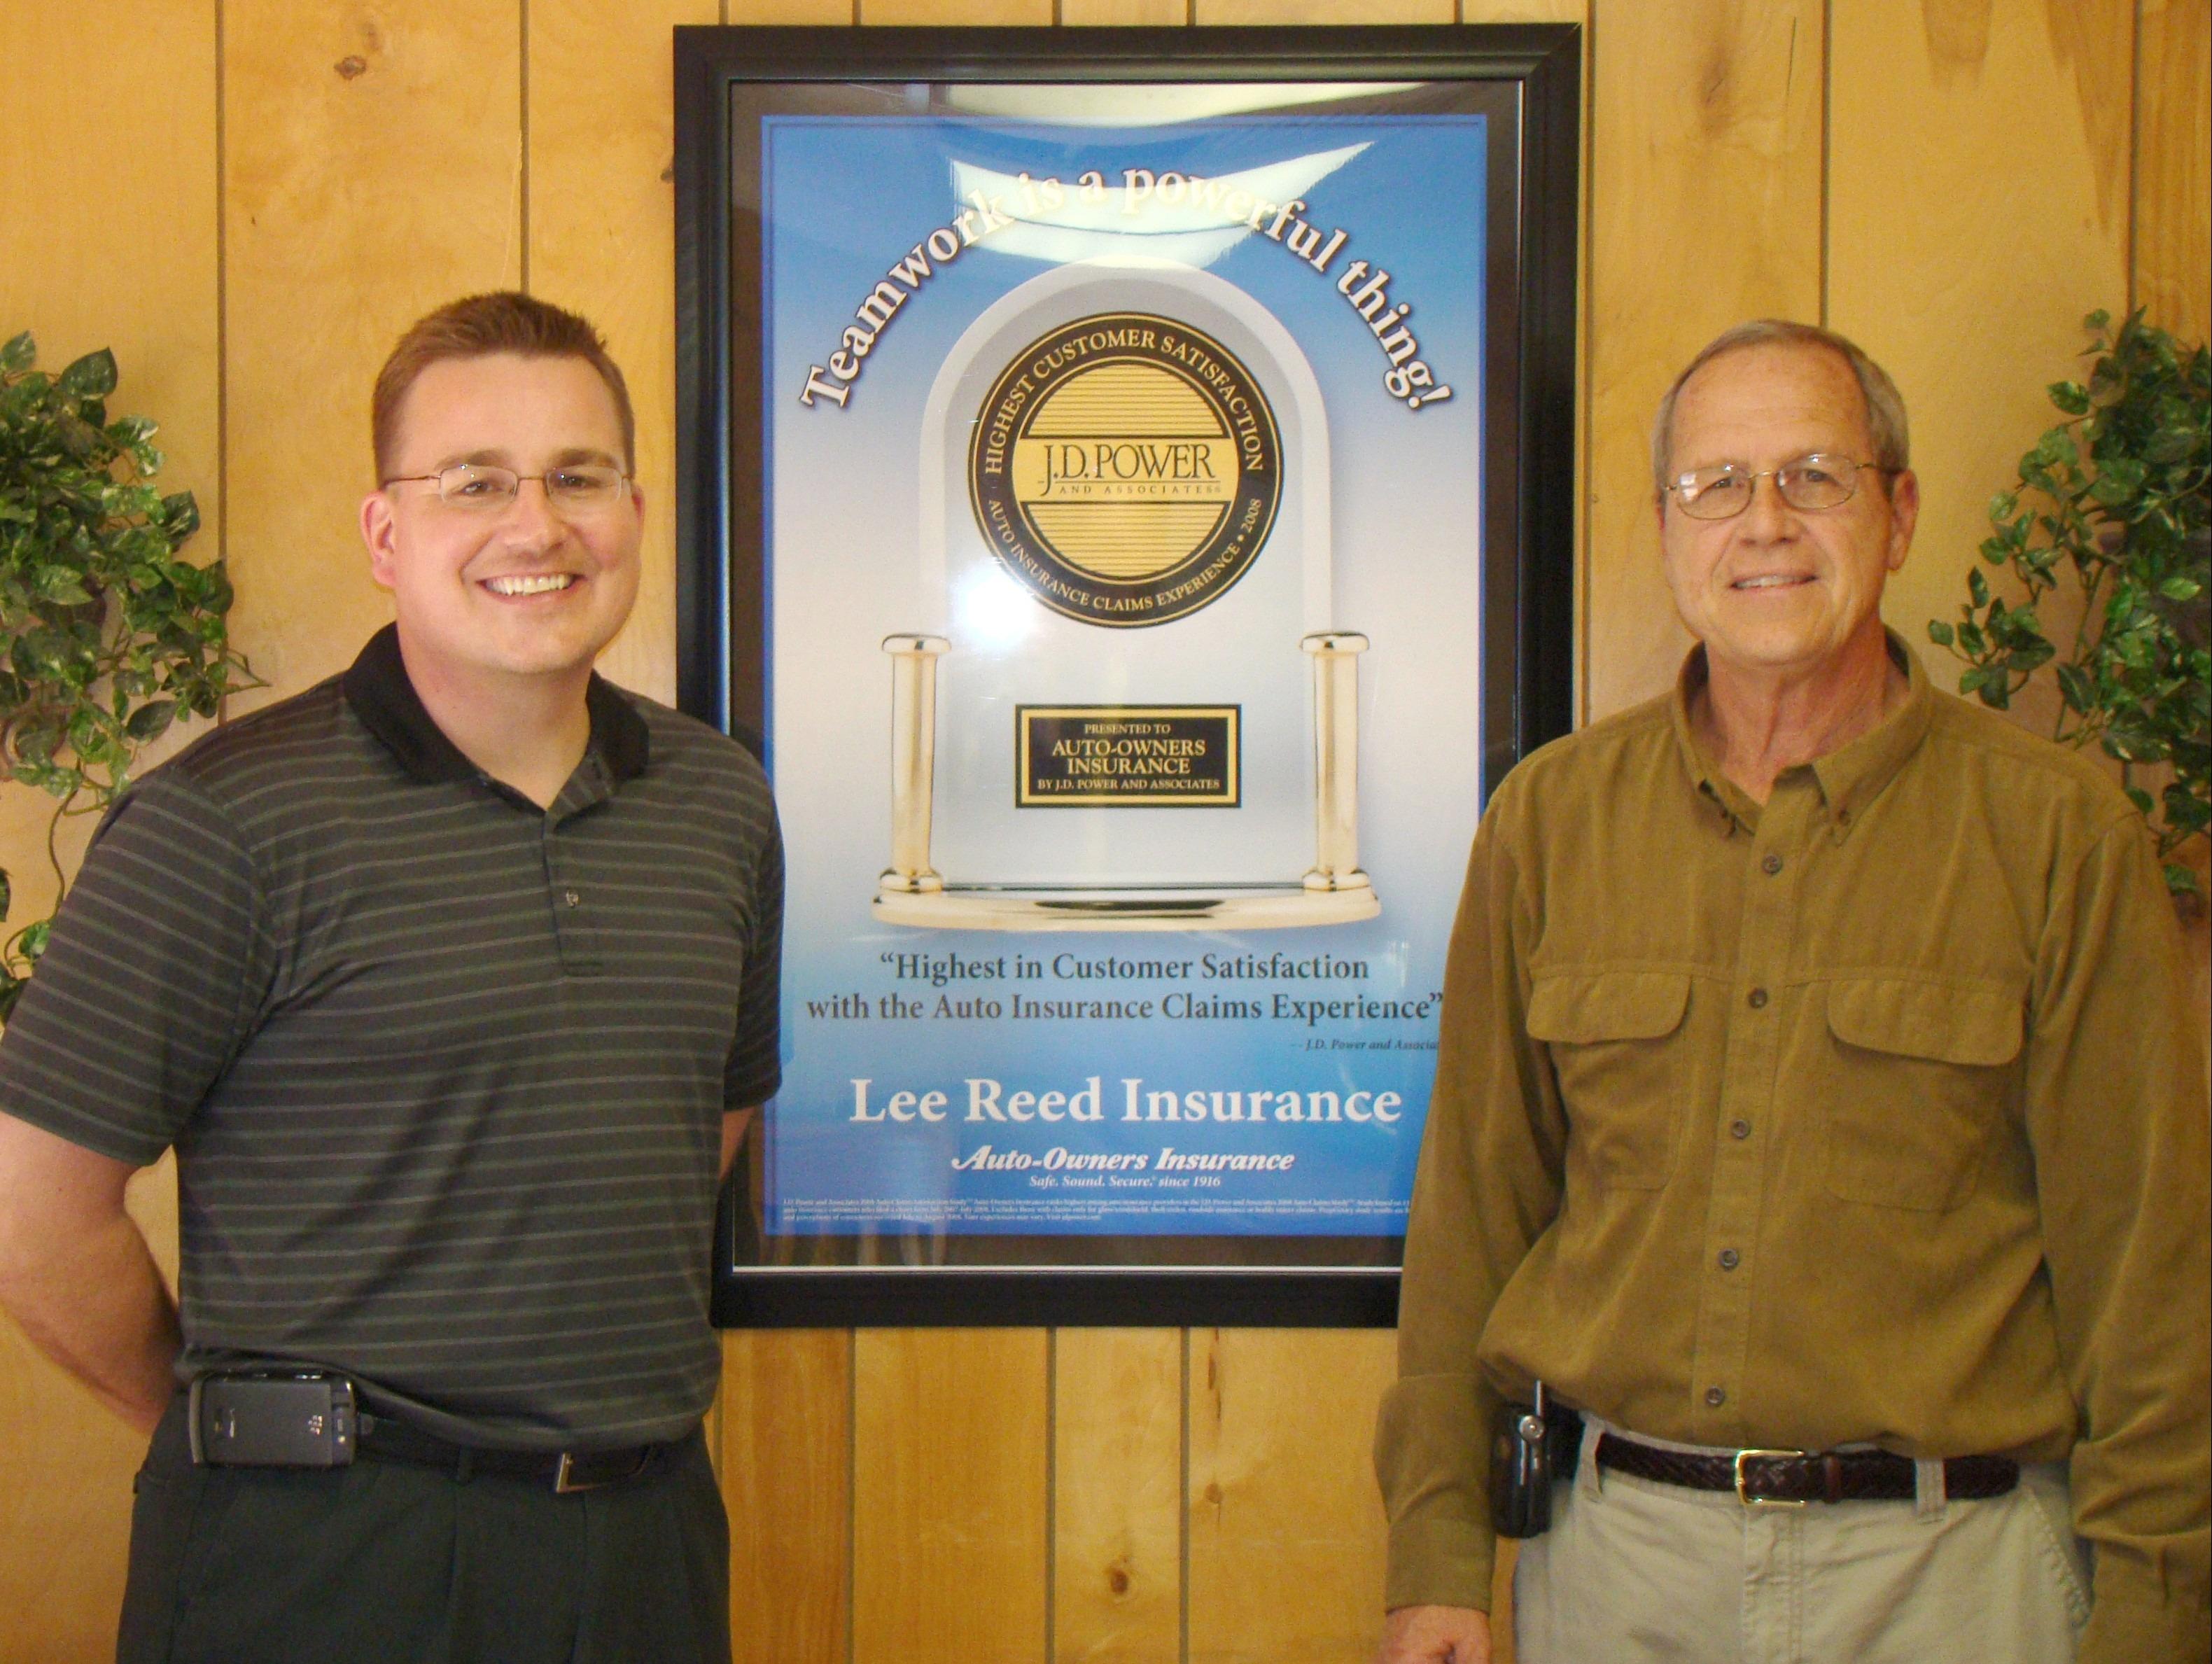 Lee Reed Insurance Photo